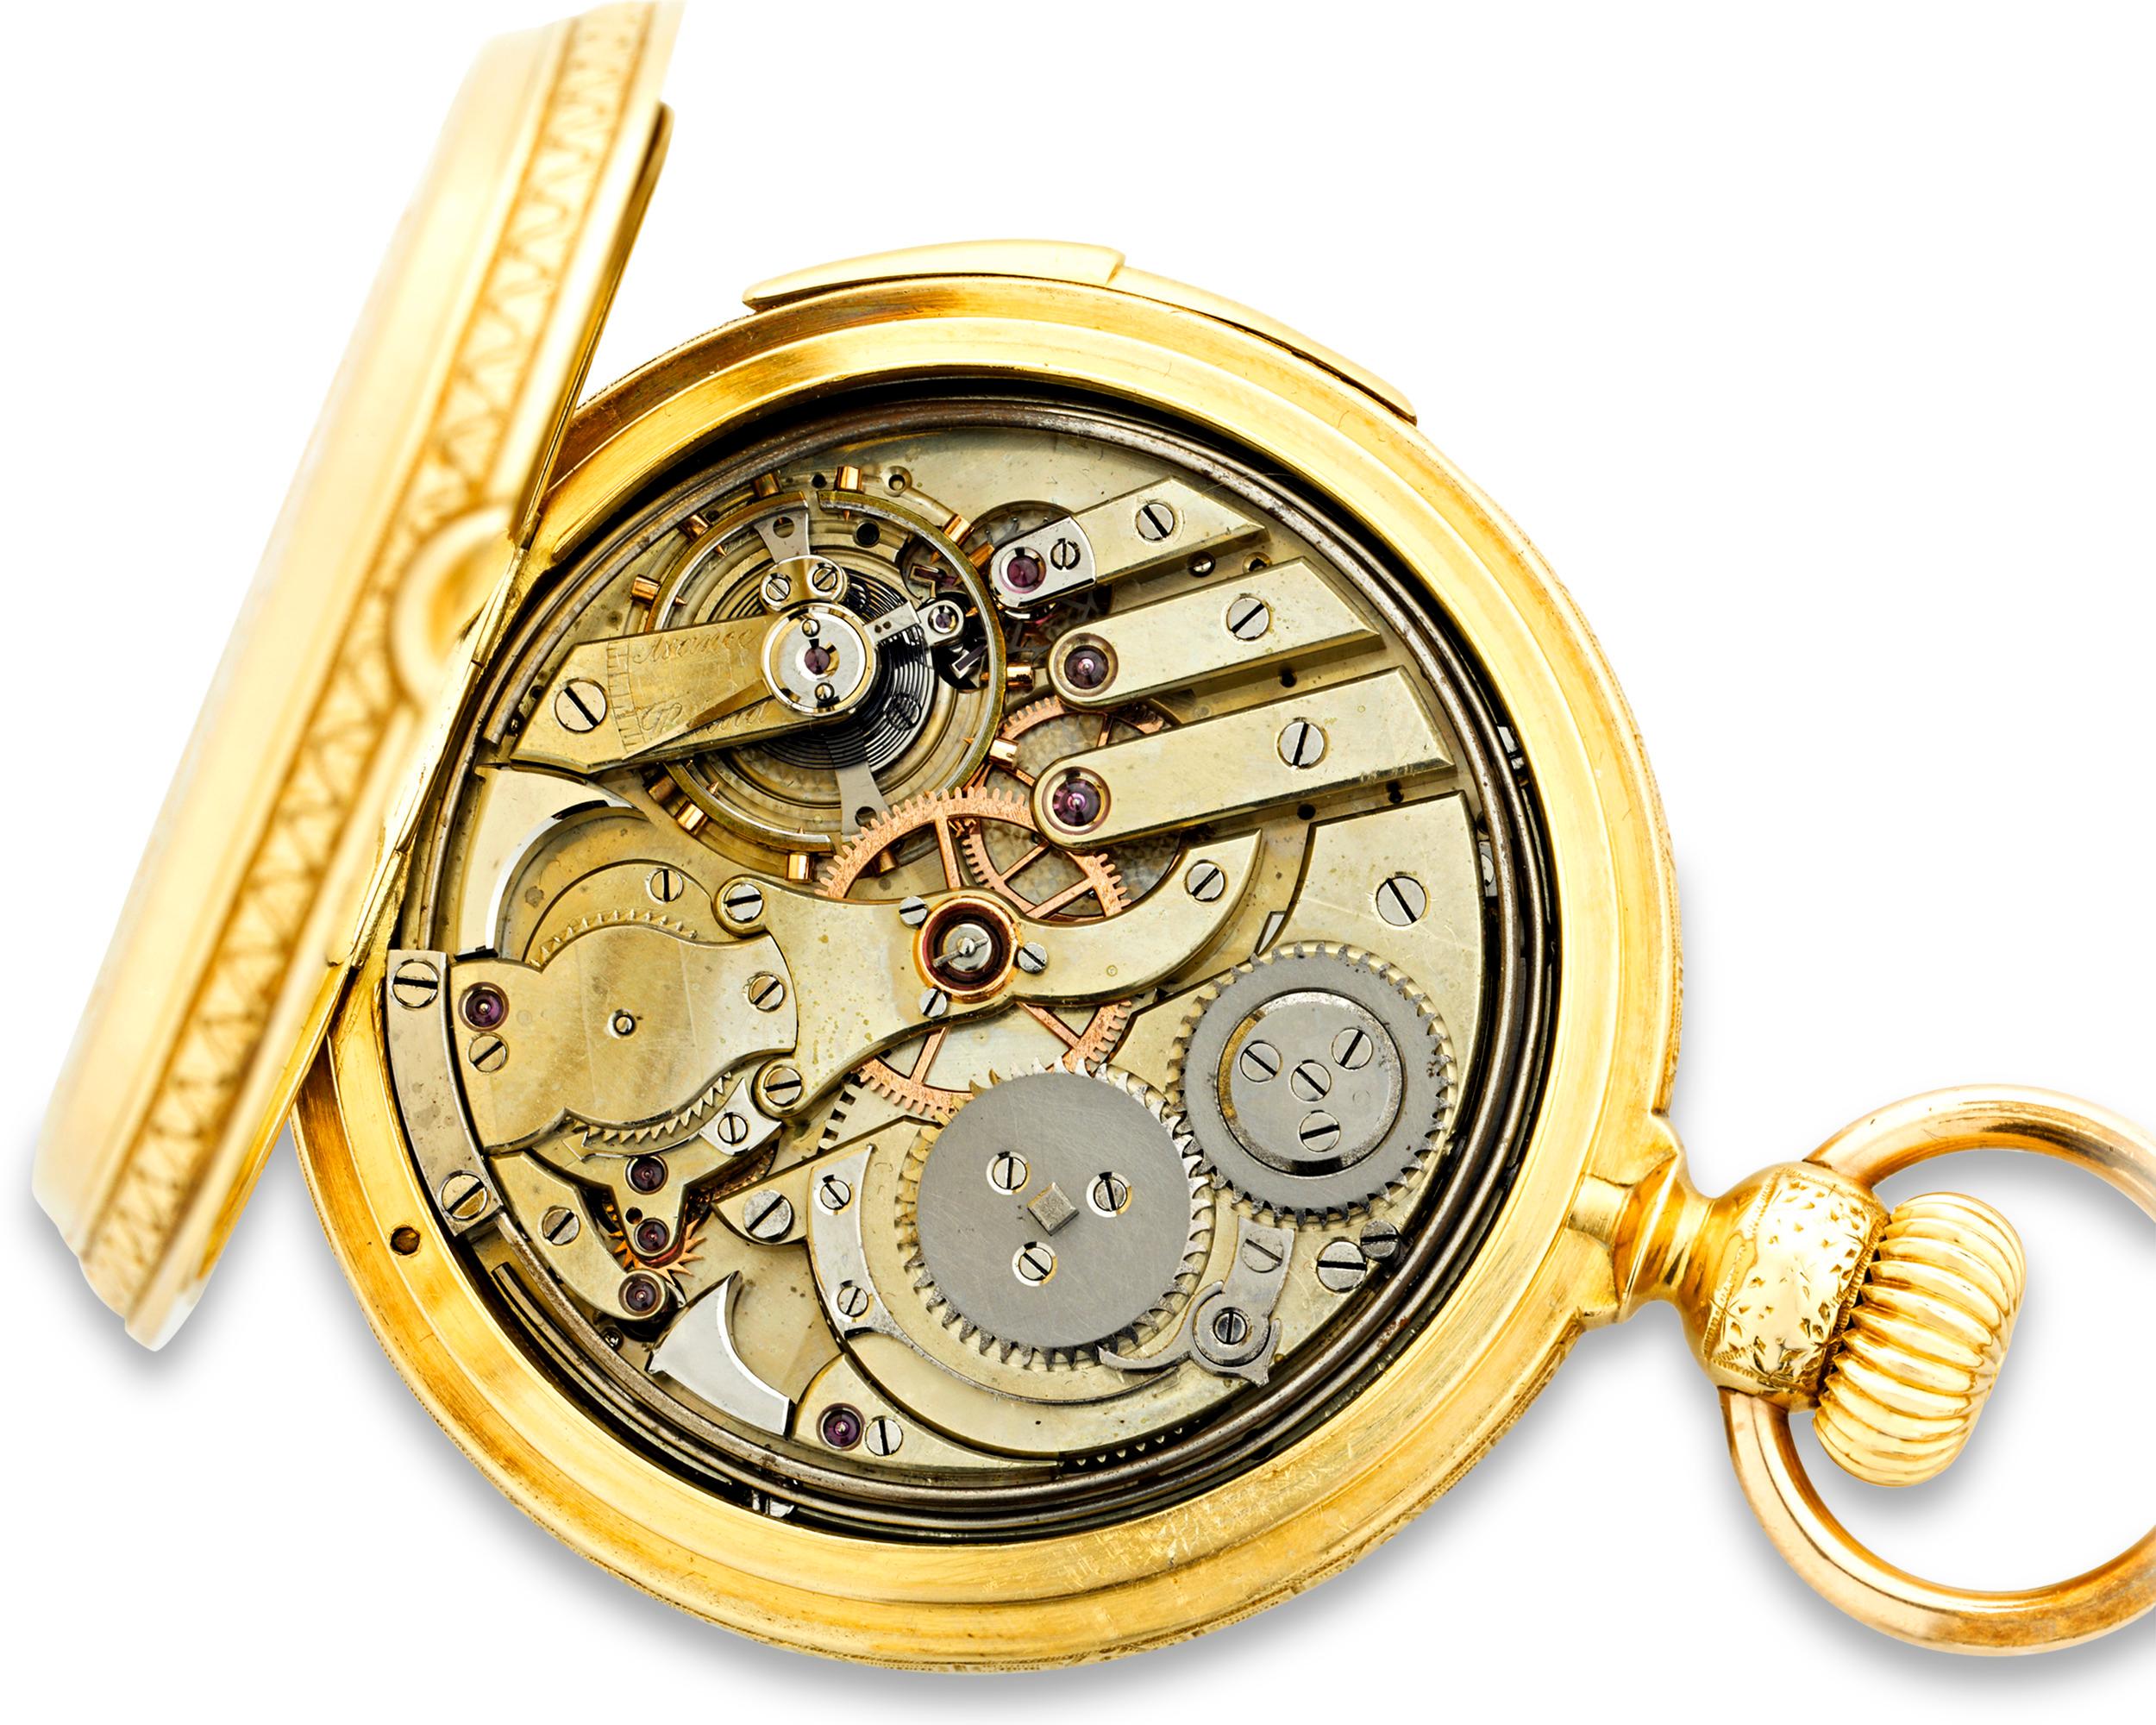 This handsome gold pocket watch by D. Borgeat, Geneva is an exemplary specimen of superior Swiss workmanship. Ornately engraved 18K yellow gold encases the timepiece, which tells the time on a silver dial engraved with elaborate gilt decoration in a